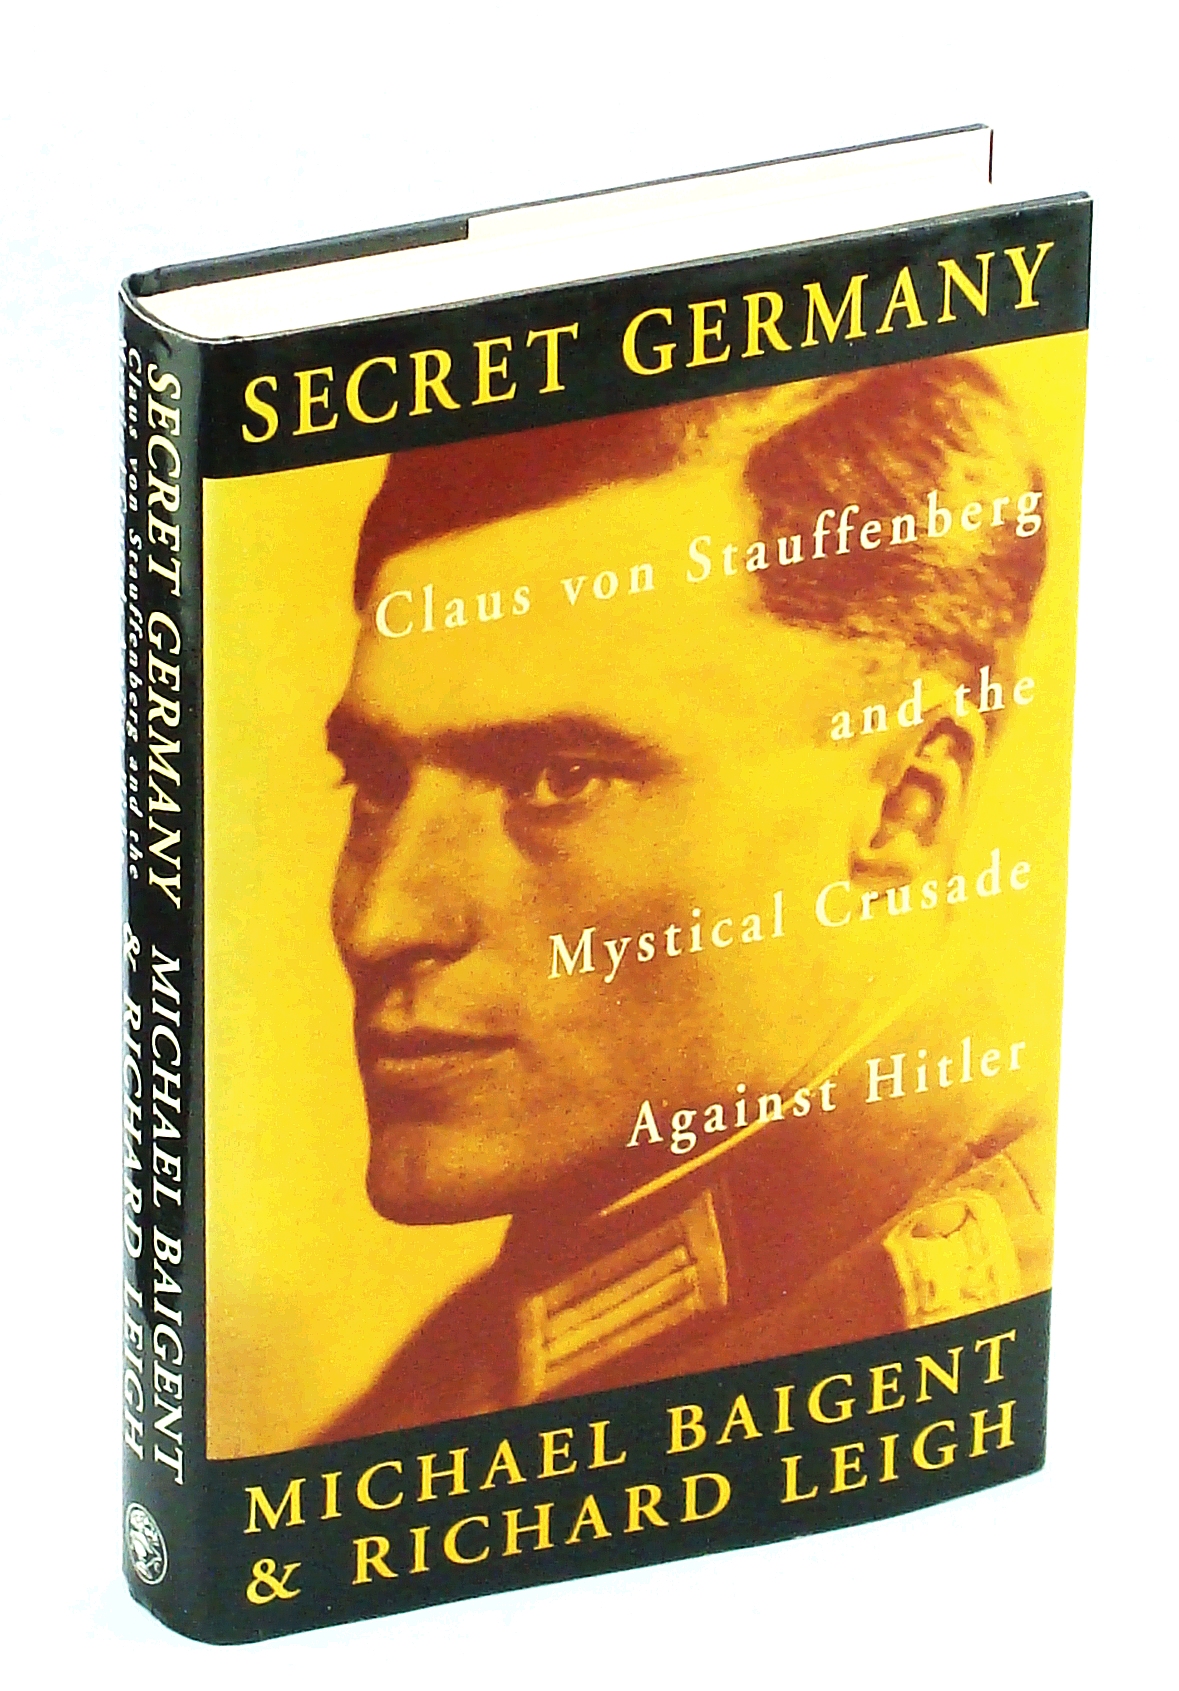 Image for Secret Germany - Claus Von Stauffenberg and the Mystical Crusade Against Hitler